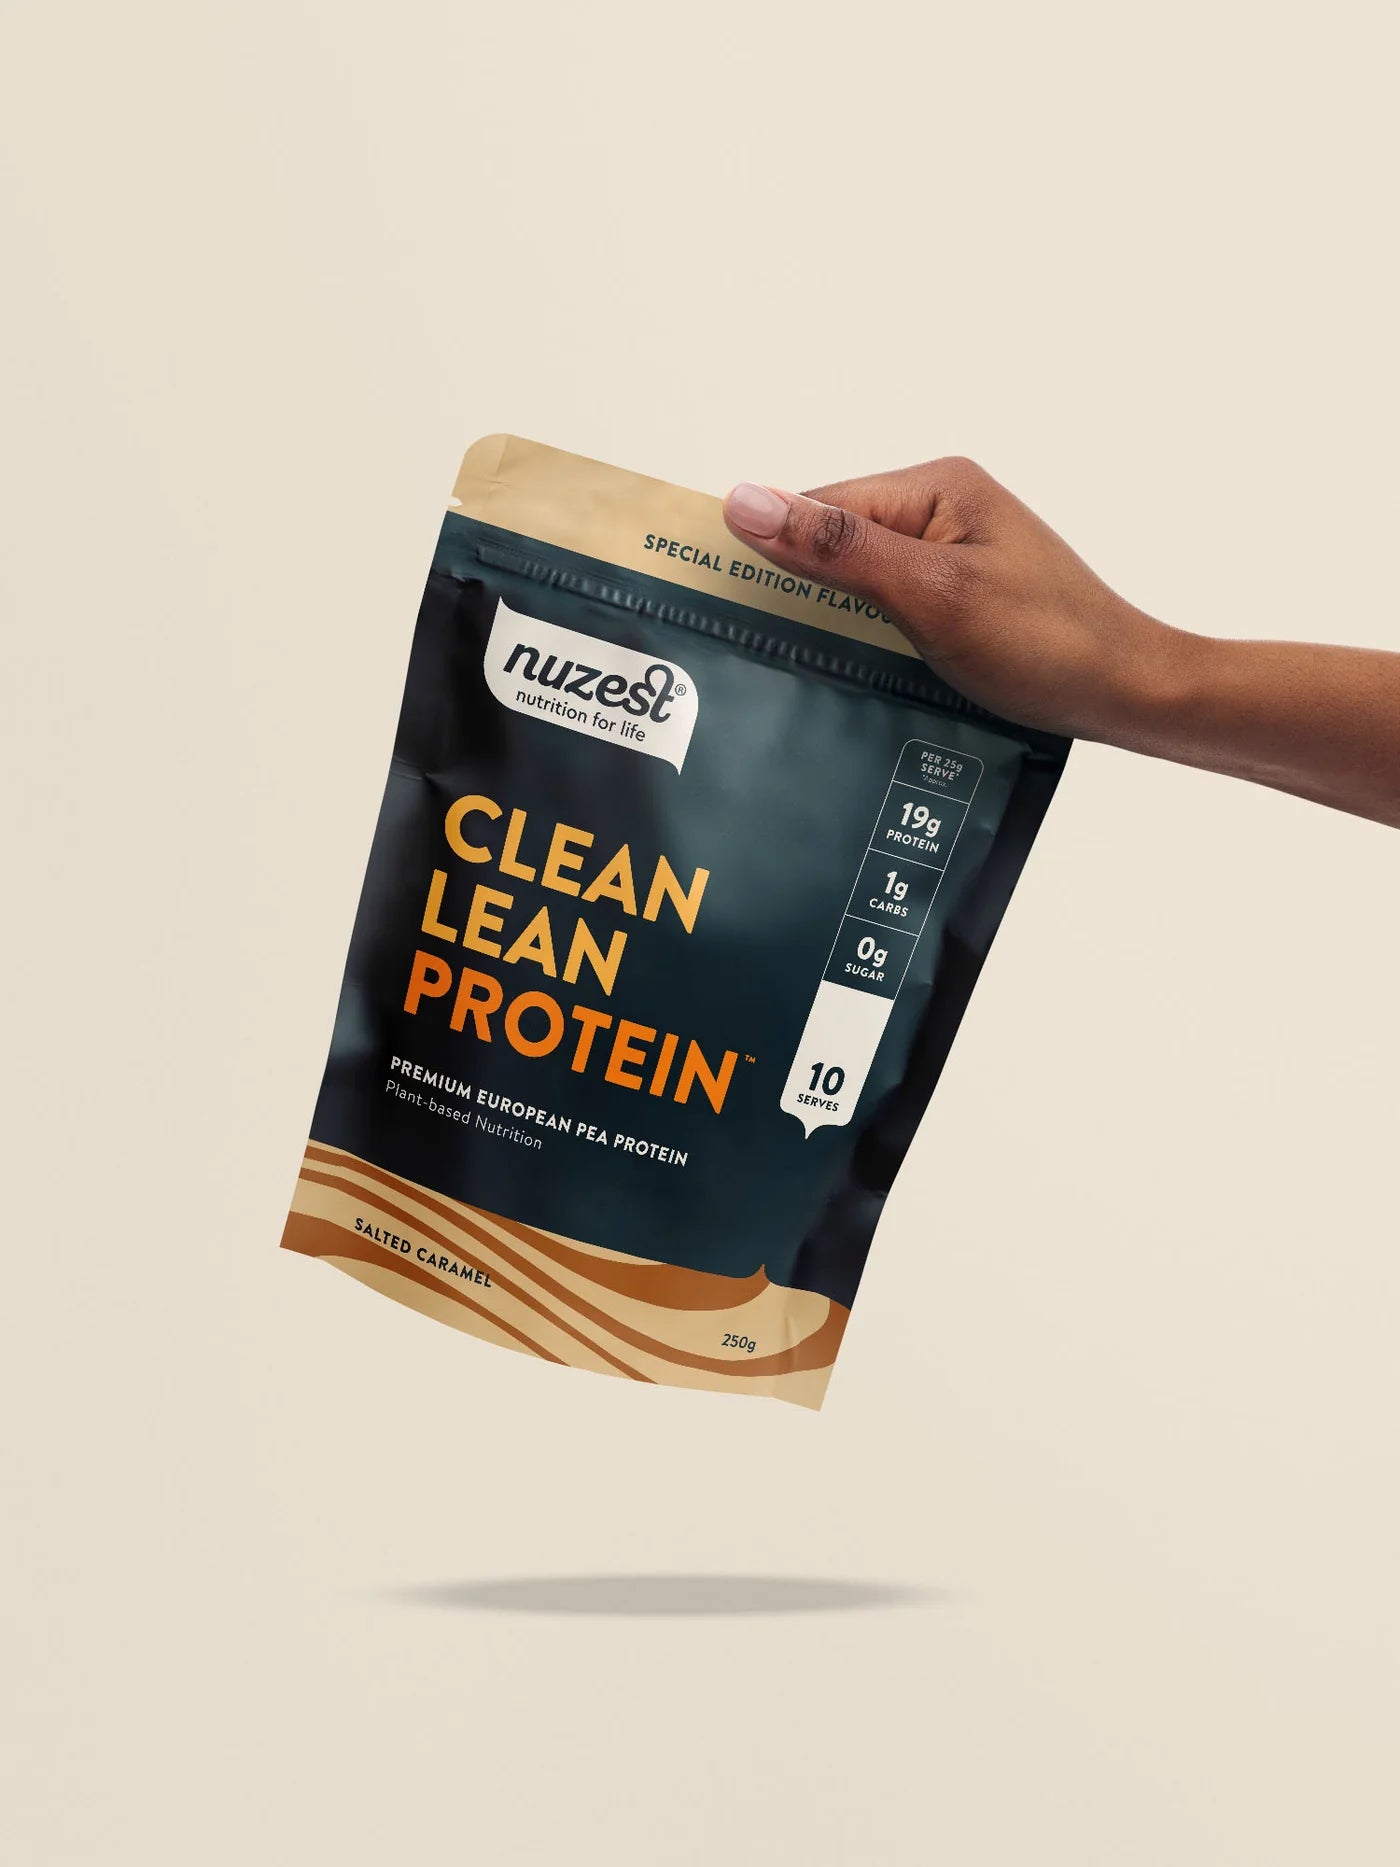 Clean Lean Protein Special Edition Salted Caramel